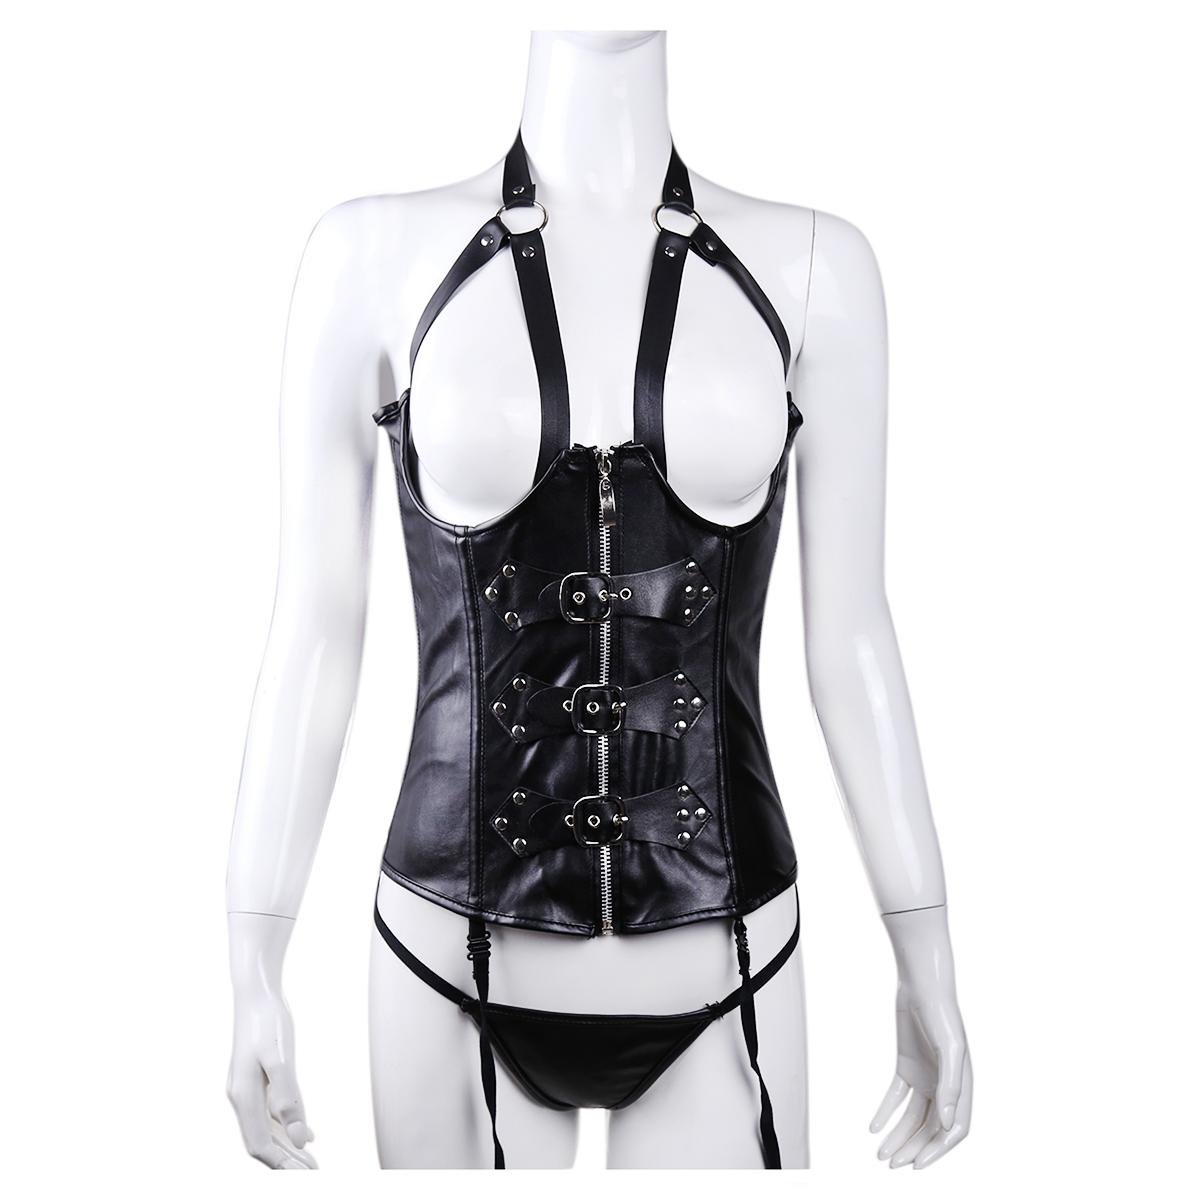 Sm Erotica Lingerie Female Tight Leather Corset Girdle Queen Of Nightclub Performance Bondage Gear With Body Shoulder Harness